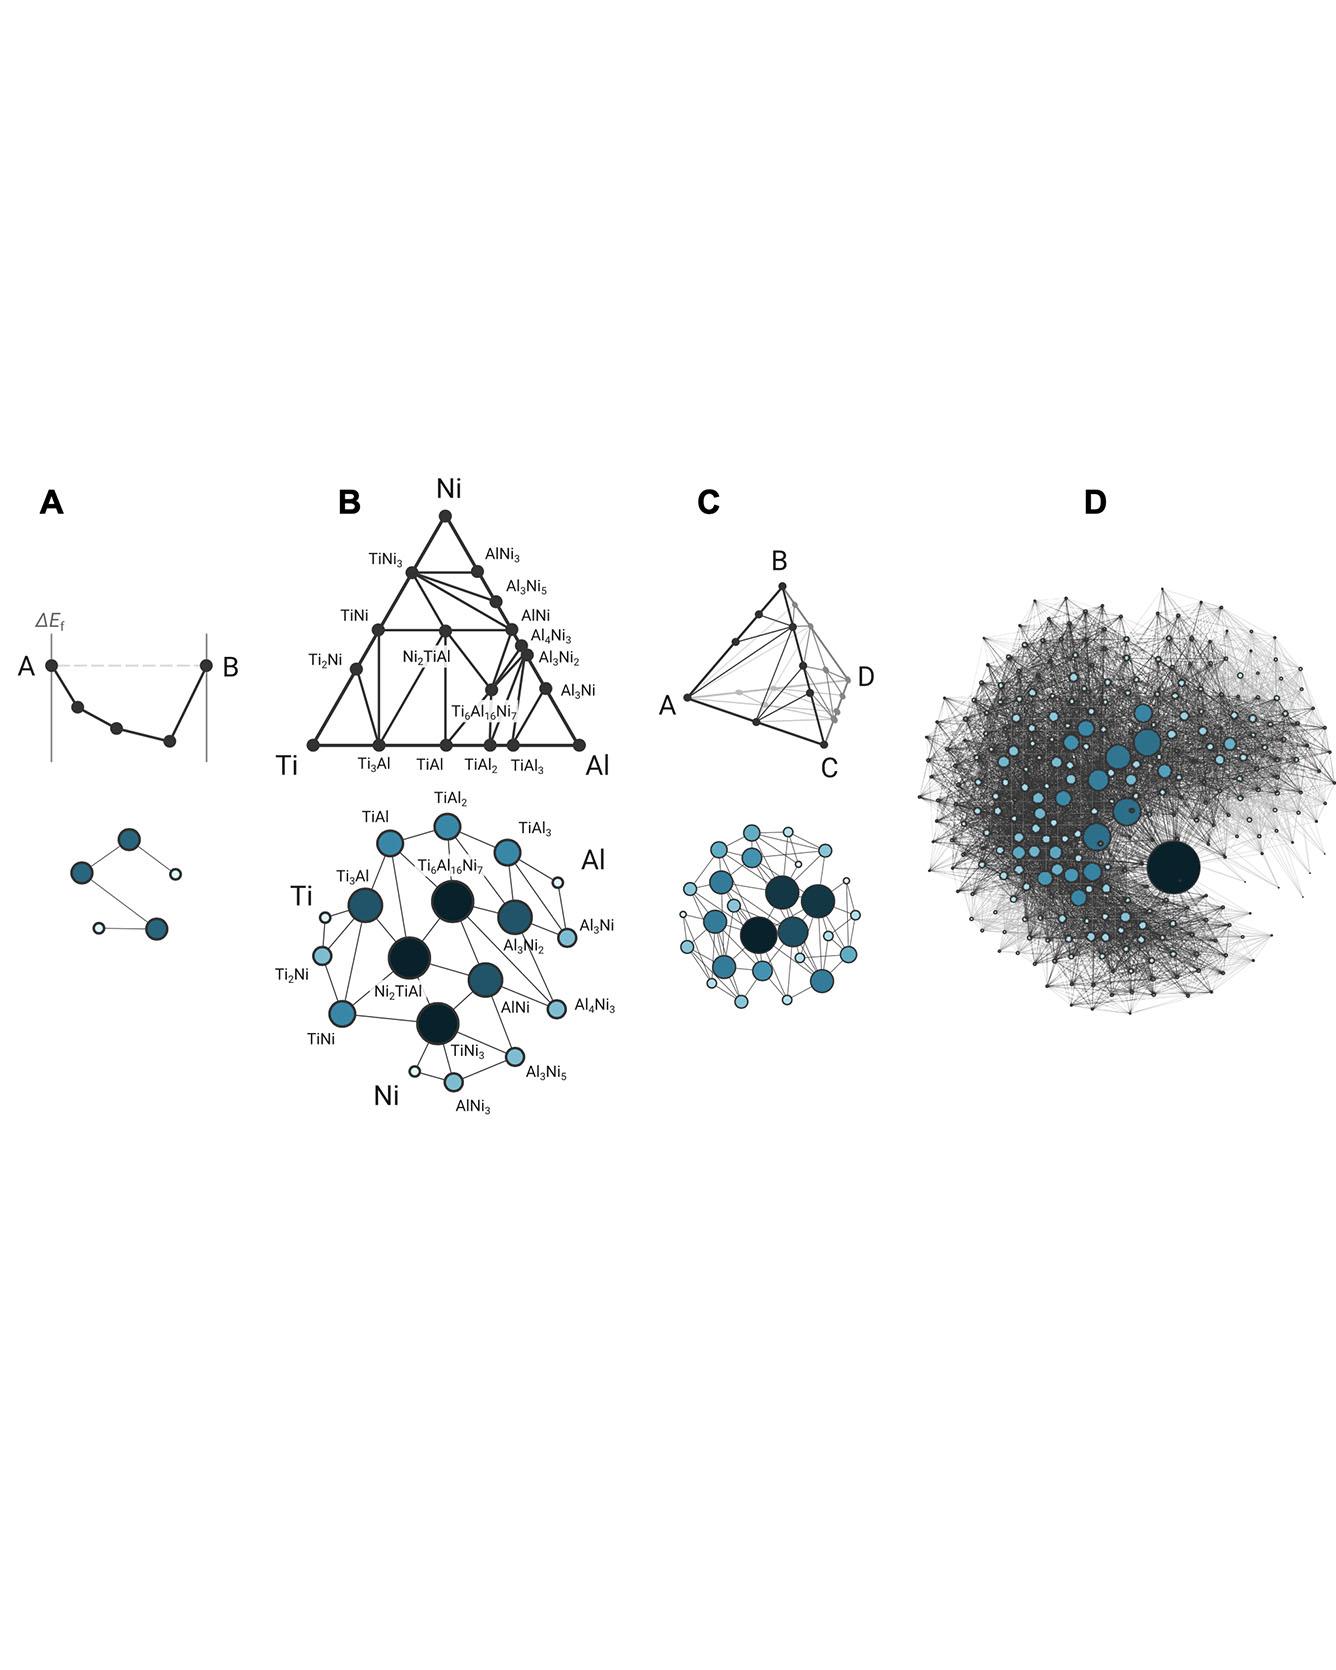 The phase stability network of all inorganic materials